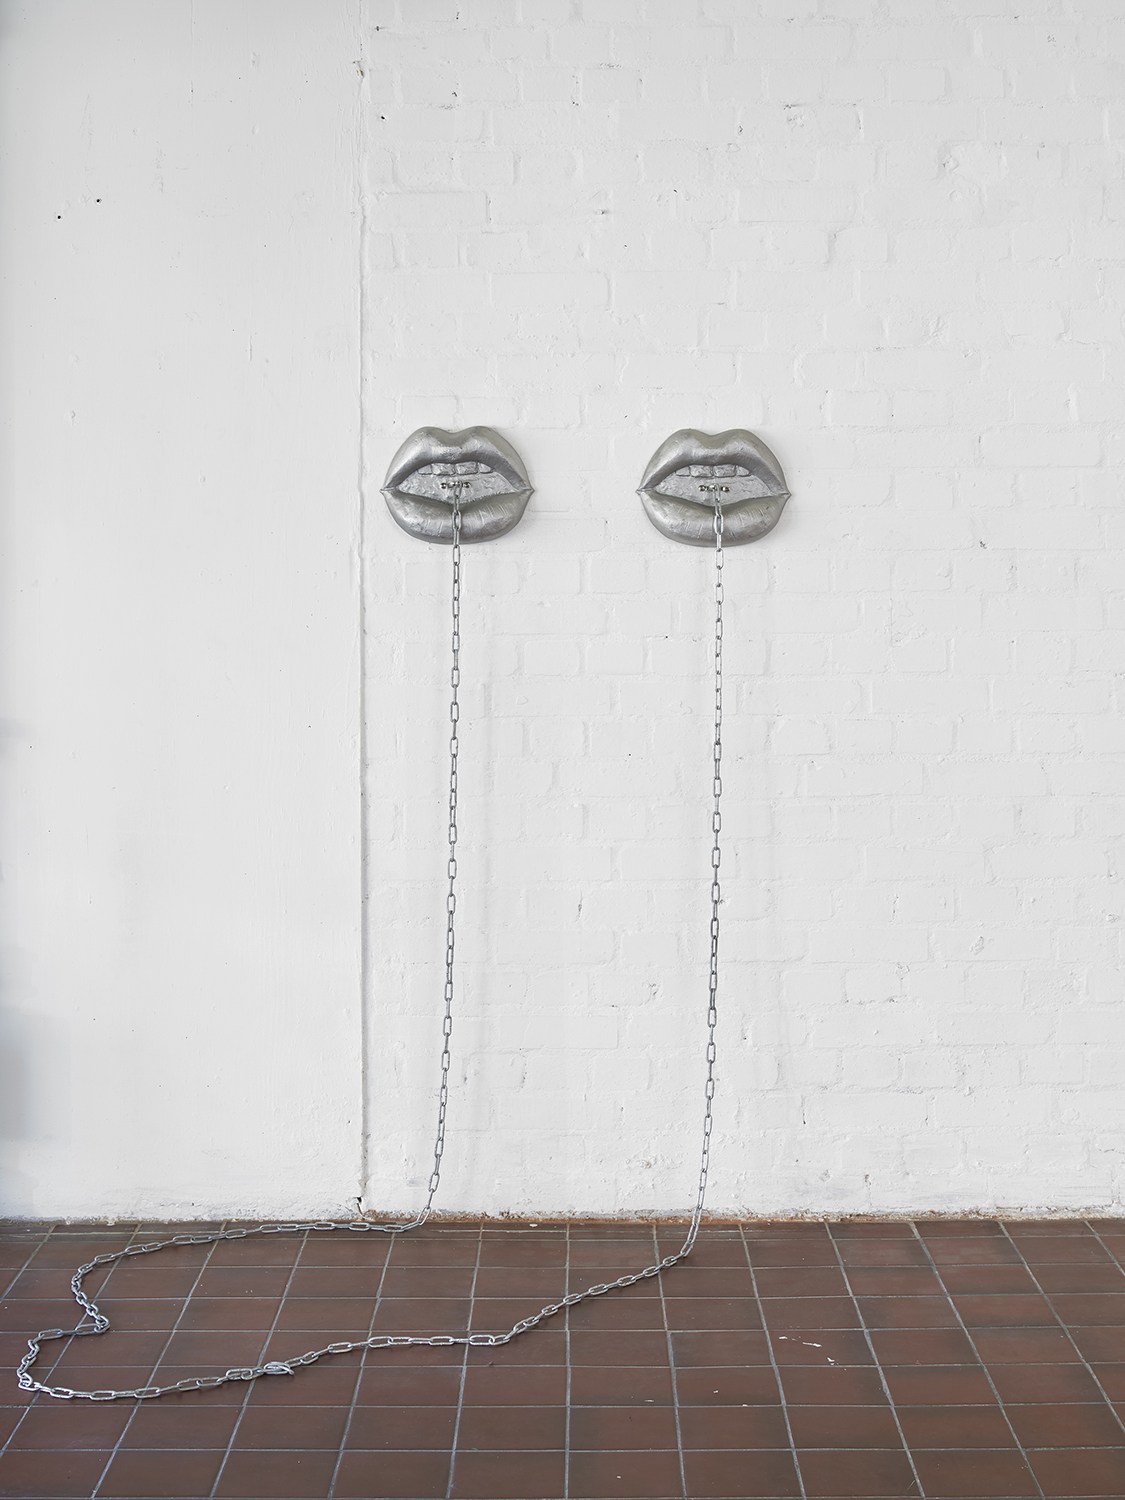  Liz Craft,  Between You &amp; Me (I - V) , 2018, Aluminum, steel chain, Pair of mouths: 28 x 21.5 x 5.7 cm / 11 x 8.5 x 2.25 in each, Chain dimensions variable 